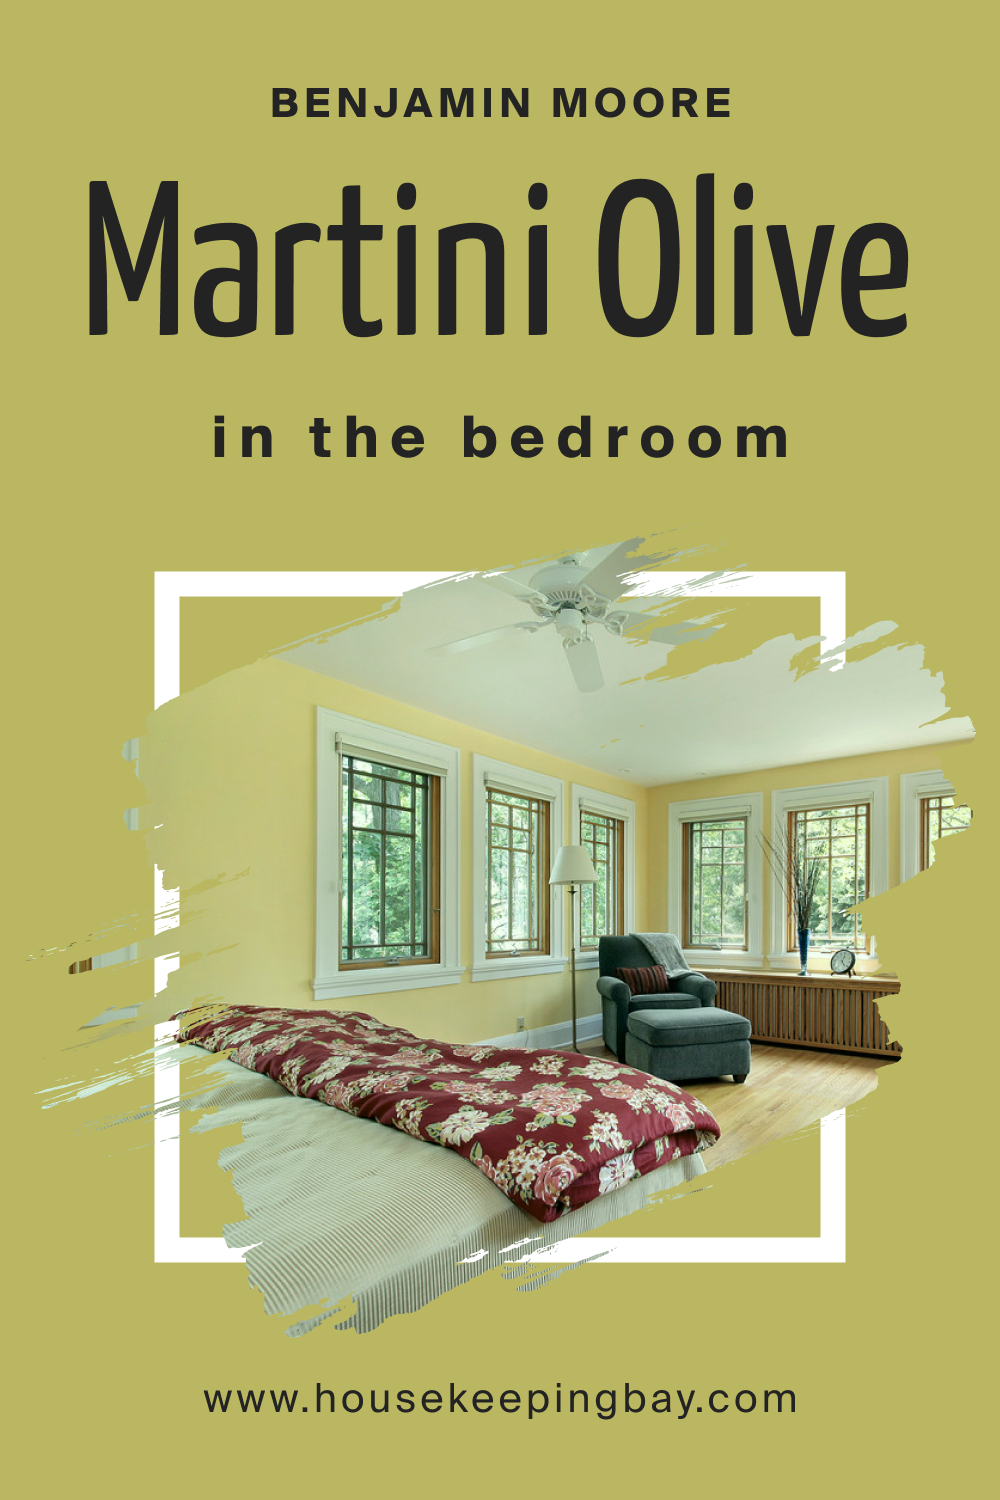 How to Use Martini Olive CSP-890 in the Bedroom?